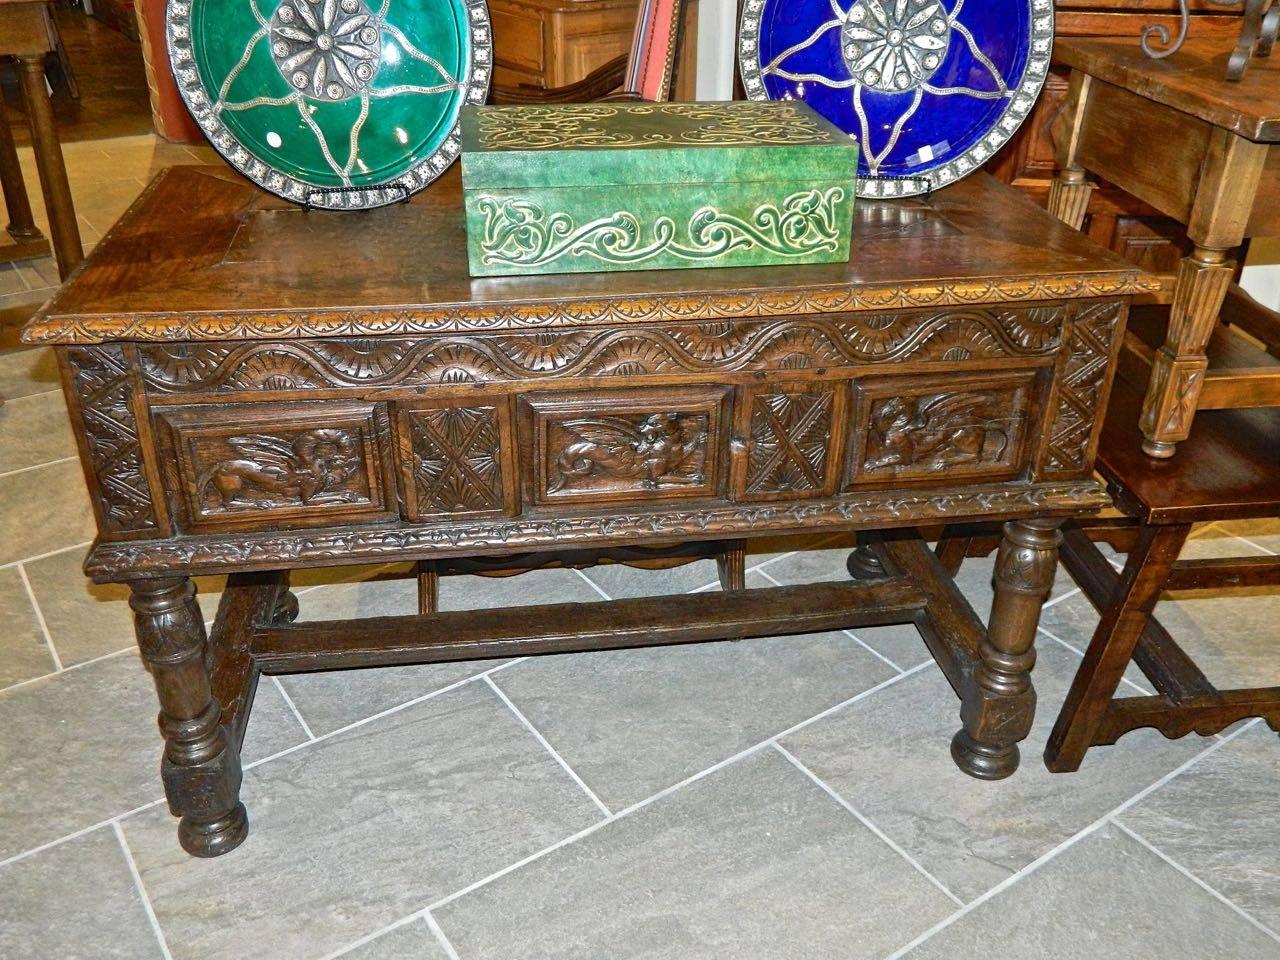 A beautifully preserved early 17th Century table chest (